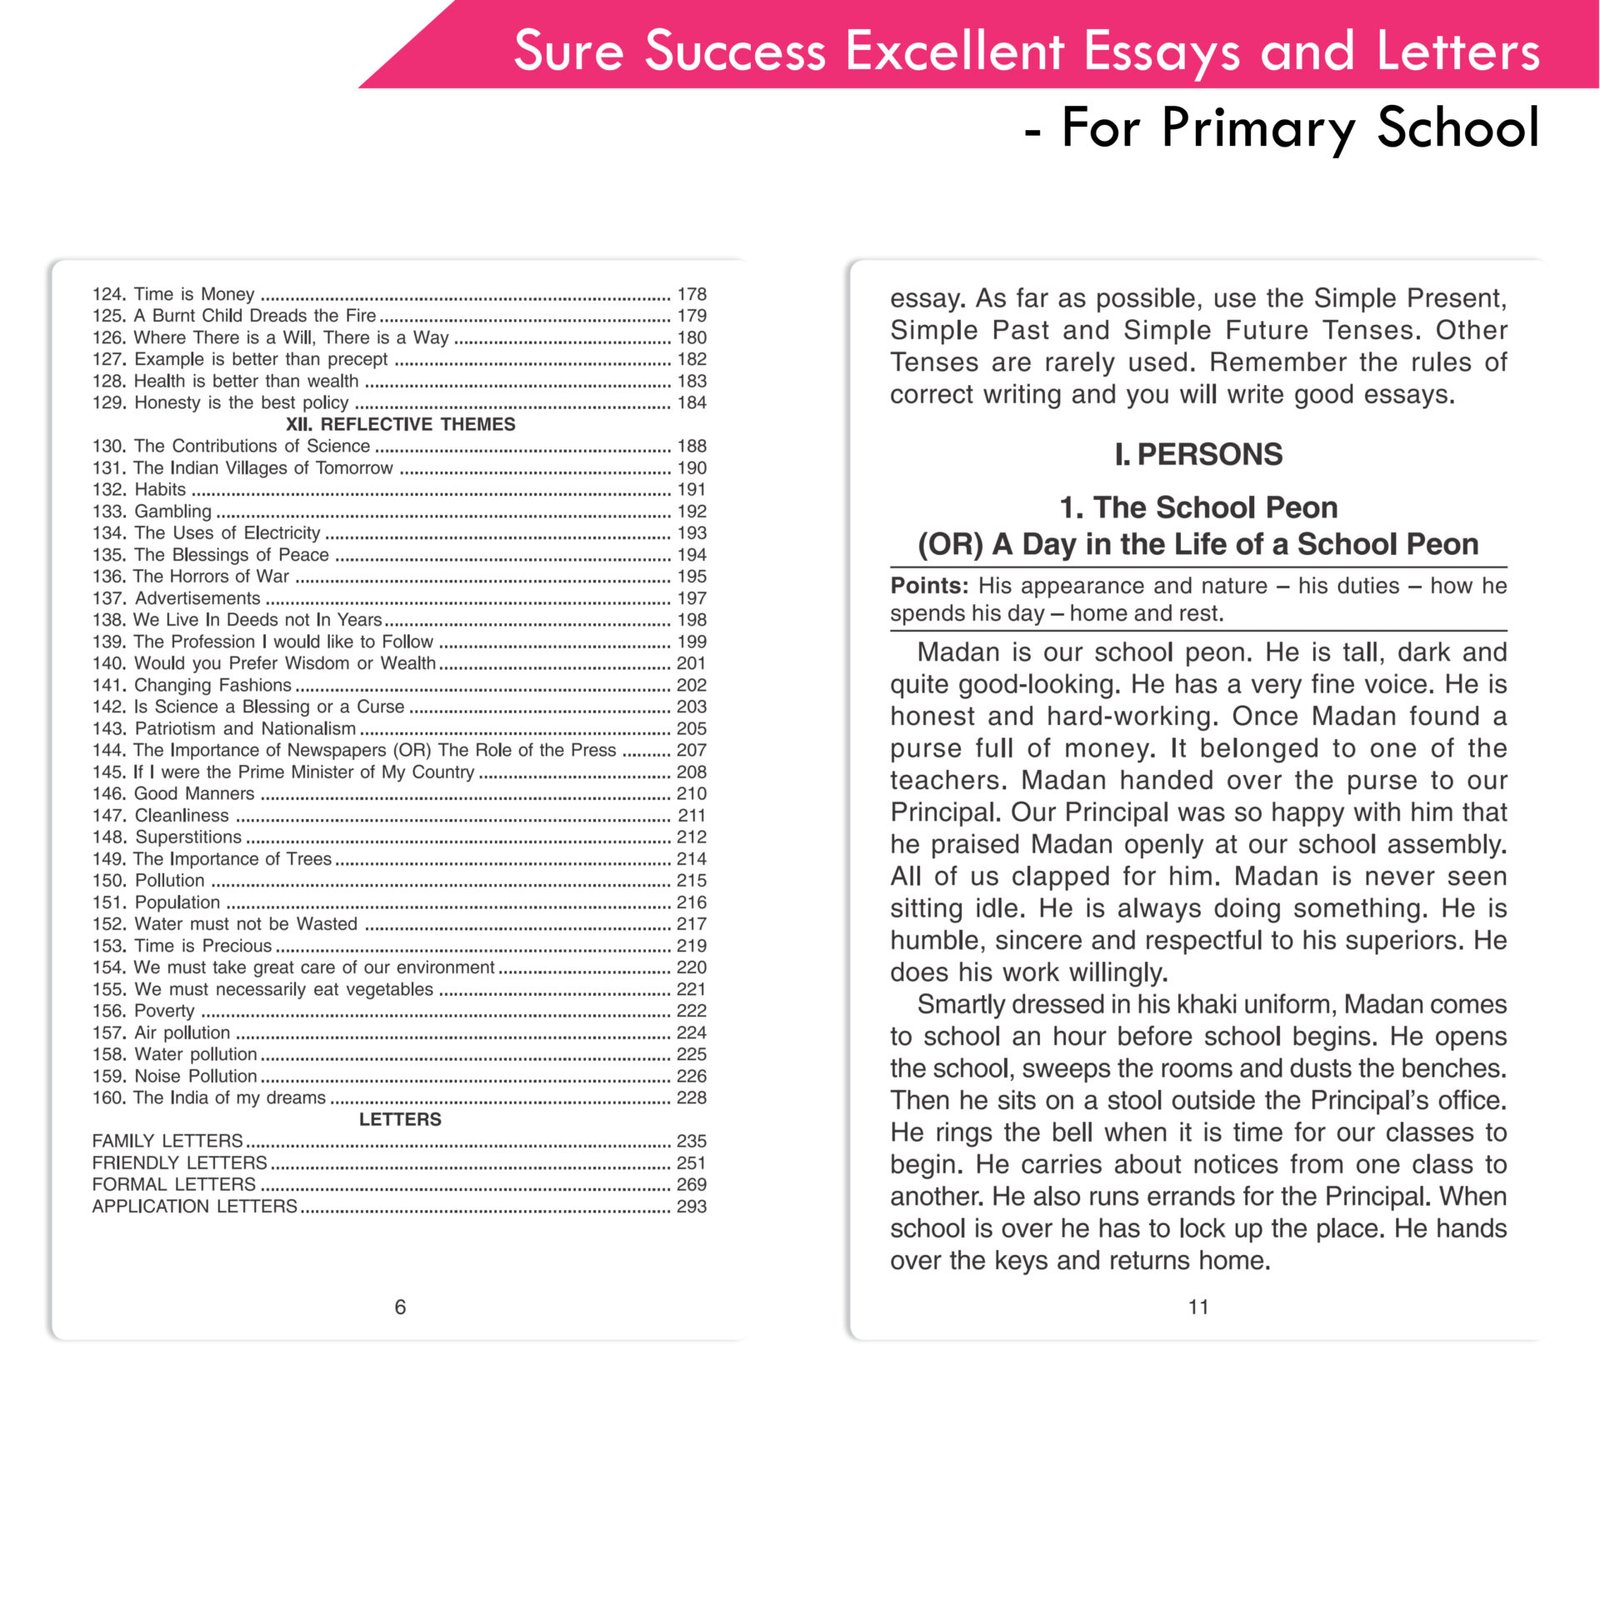 Sure Success Excellent Essays and Letters For Primary School 5